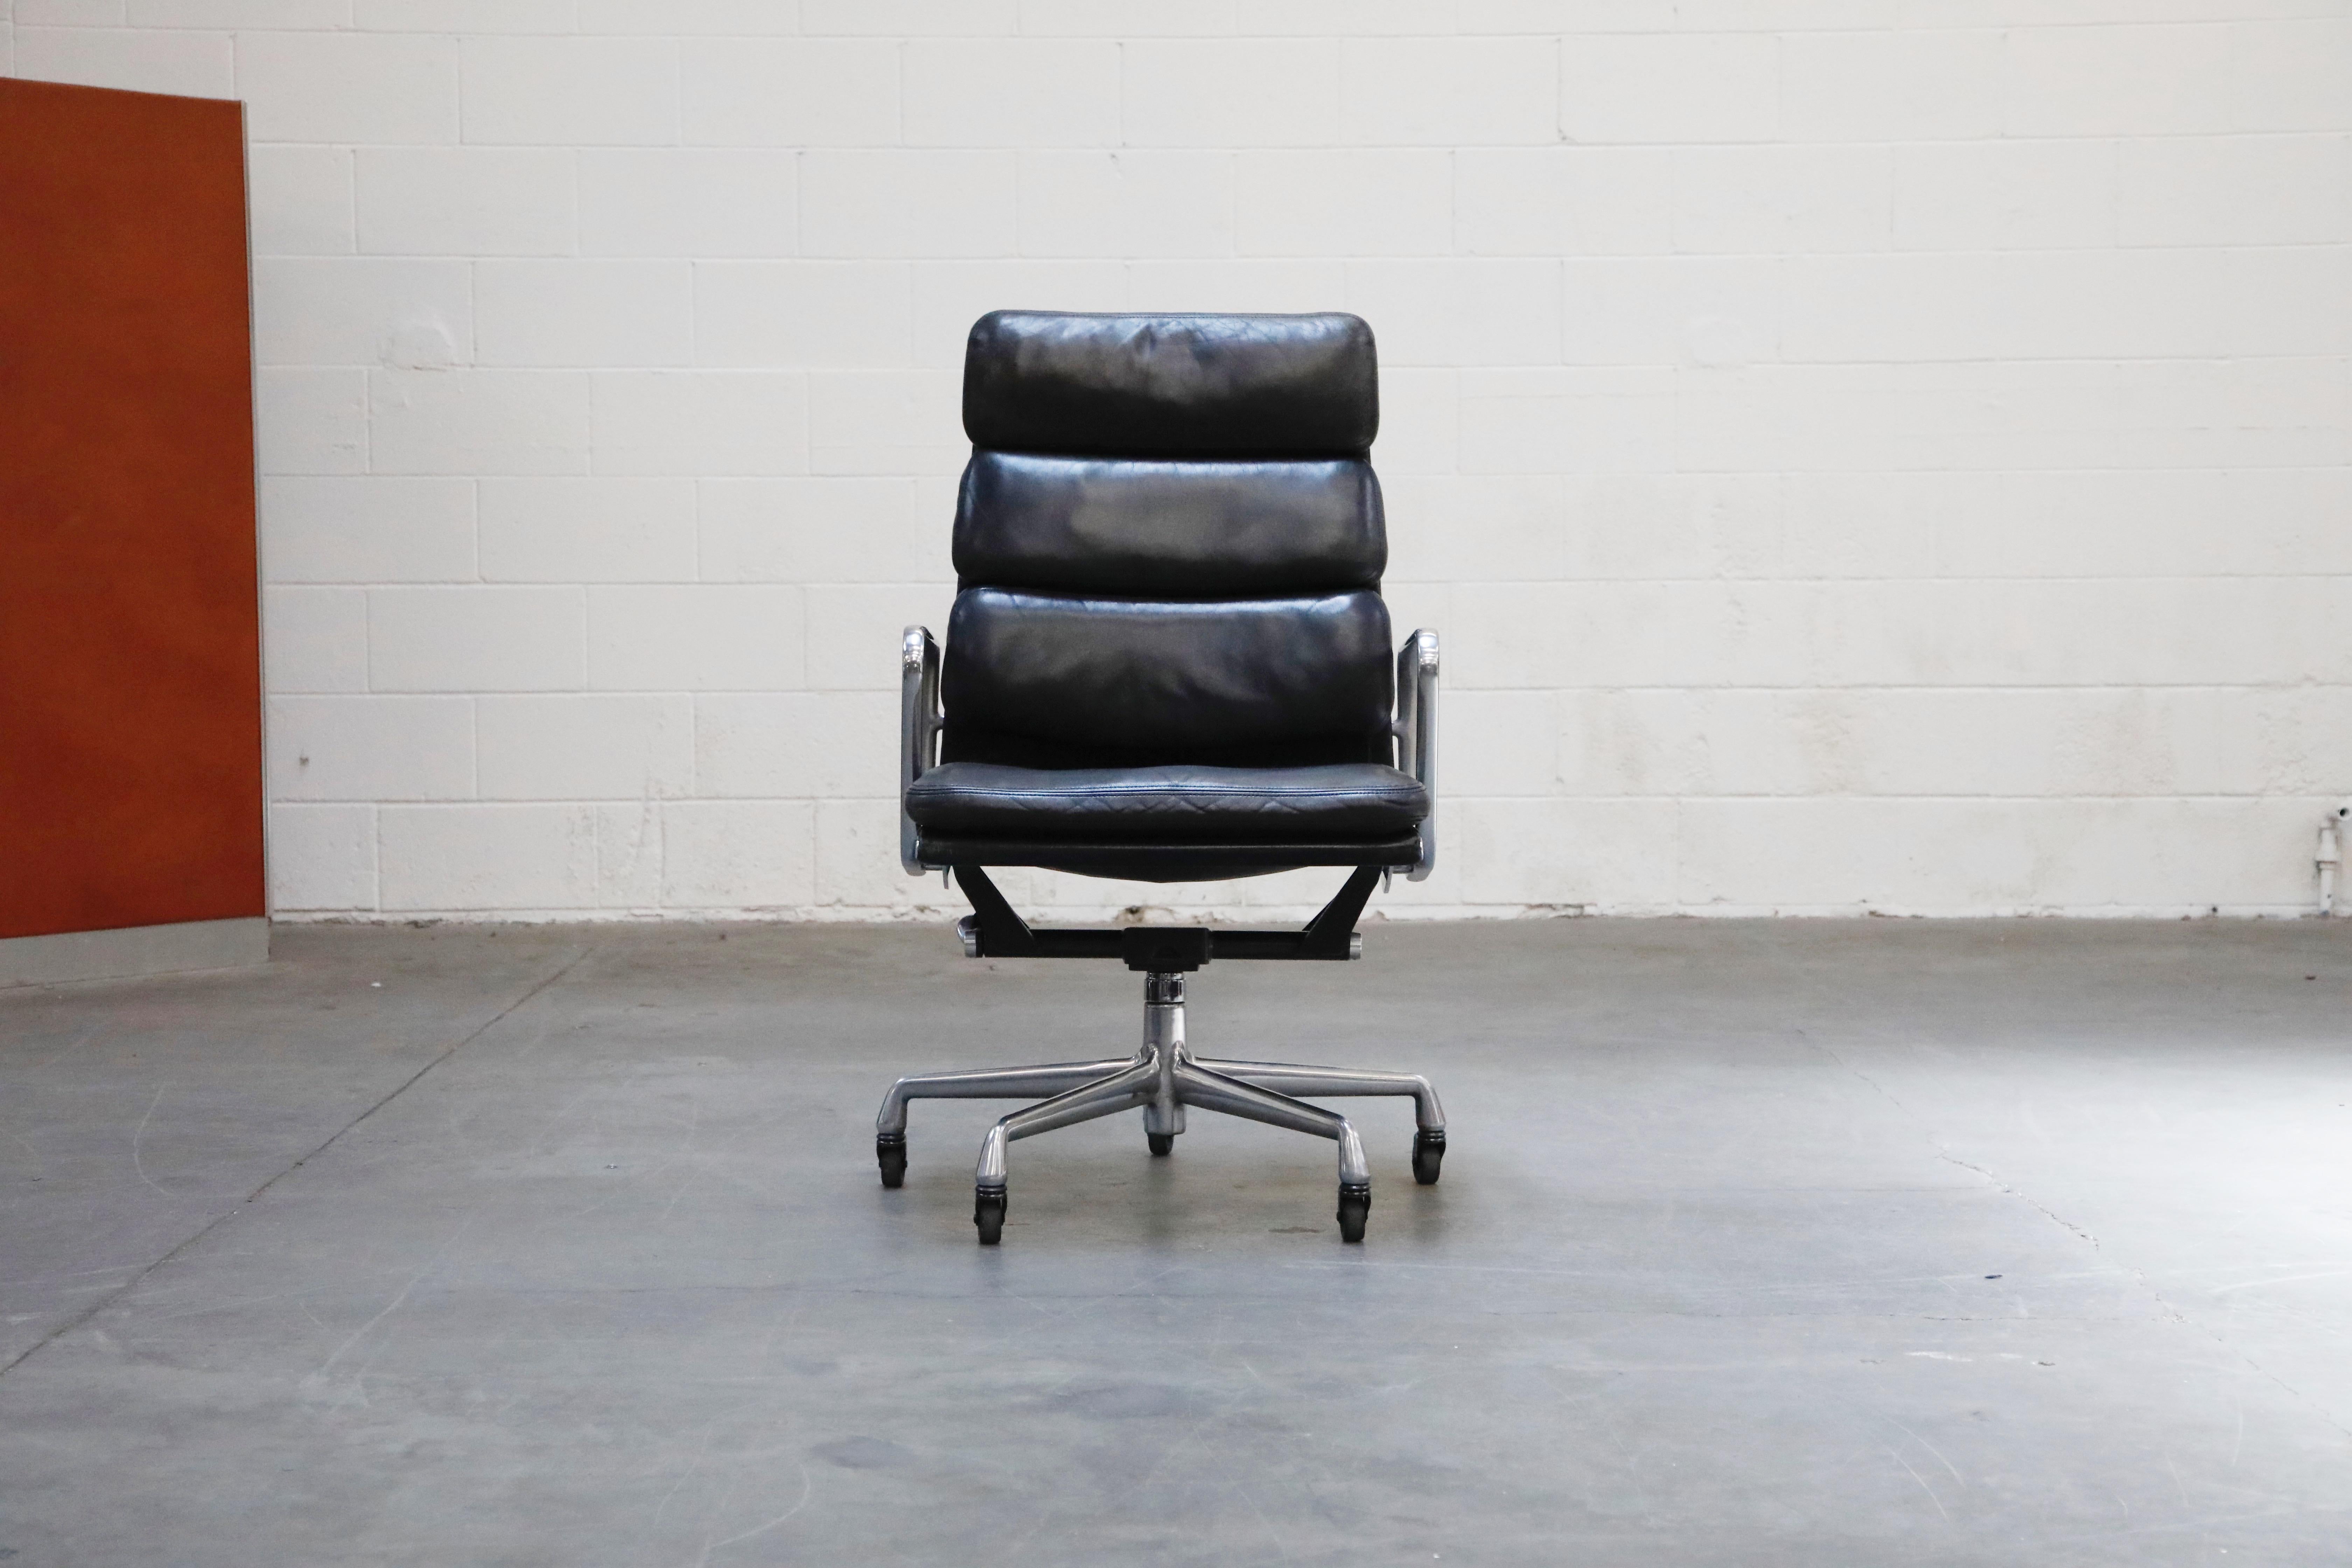 Incredible leather on this set of fourteen (14) very collectible, Charles and Ray Eames for Herman Miller high-back 'Soft Pad' executive desk chairs. The light aging to the dark charcoal / light black color leather provides a soft patina that is so